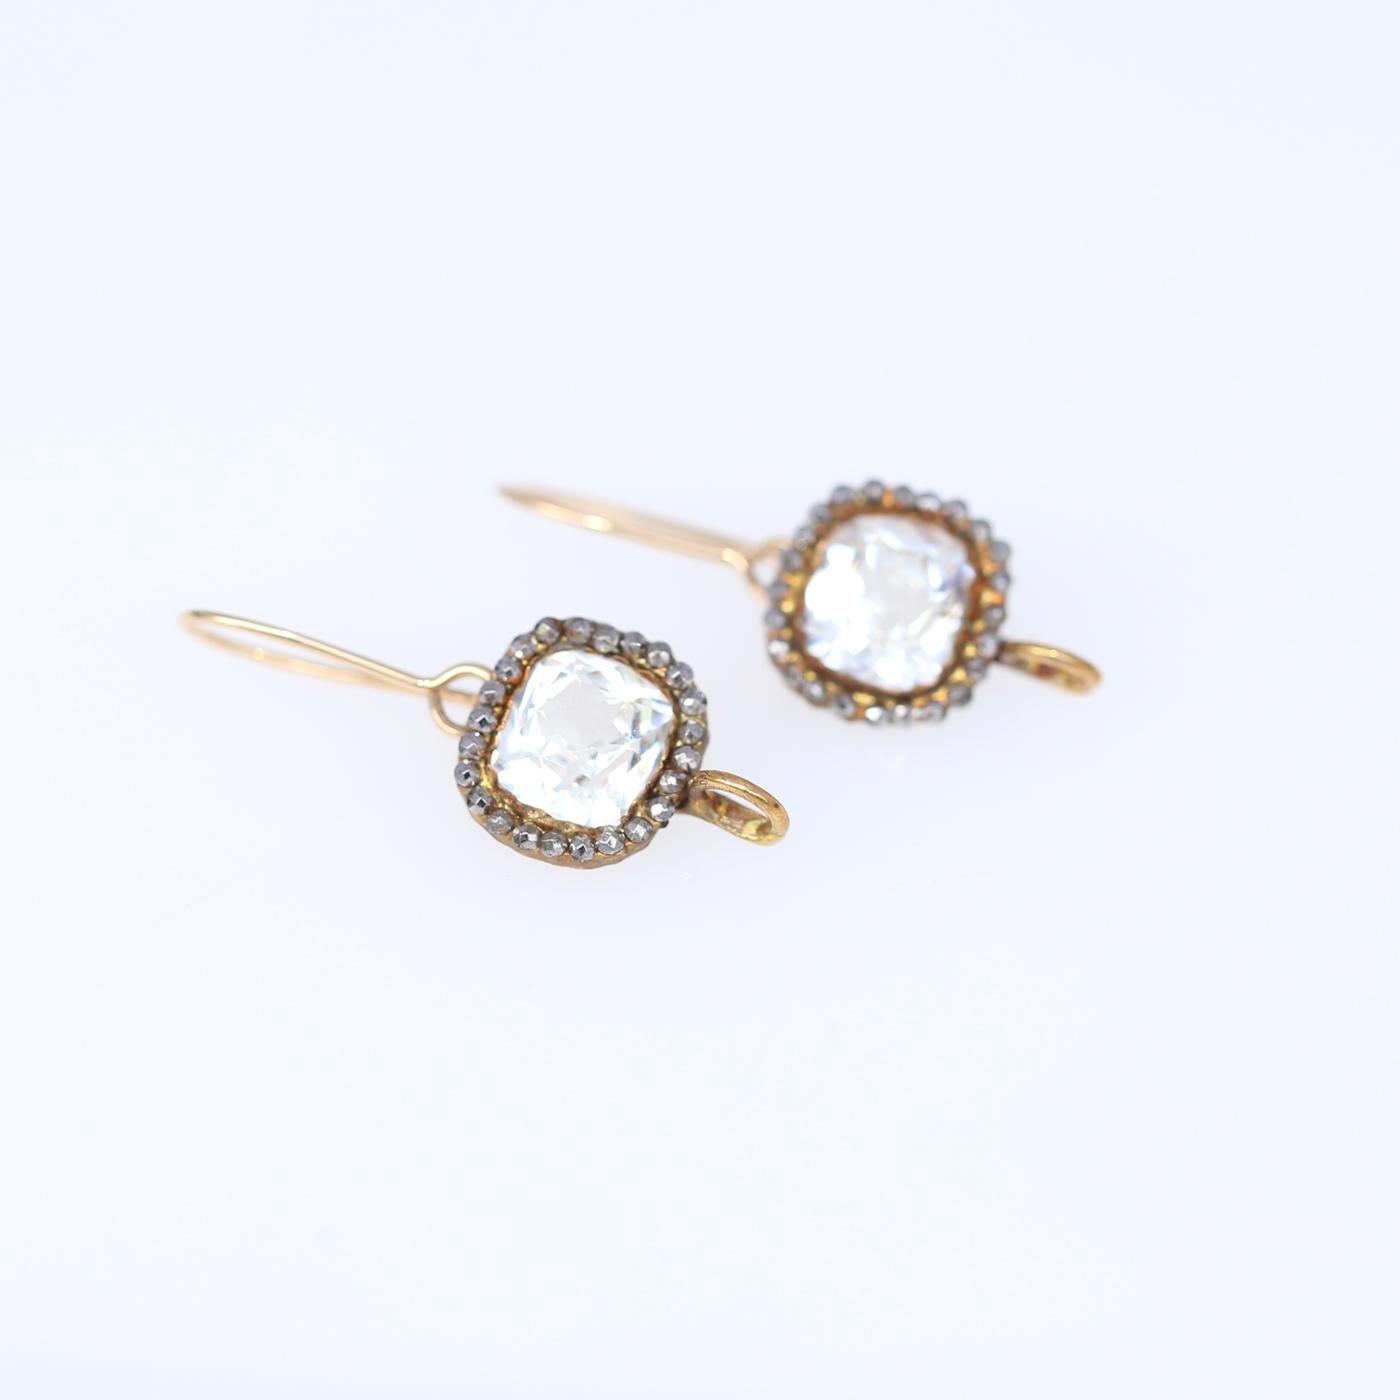 Rock Crystal Silver Gold Earrings Sustainable. Created in 1850.

The classic design of its period with a big jewel mounted in an almost circular shape on a long gold loop lock. It was mighty impressive at the end of the 19th century. Fine antique